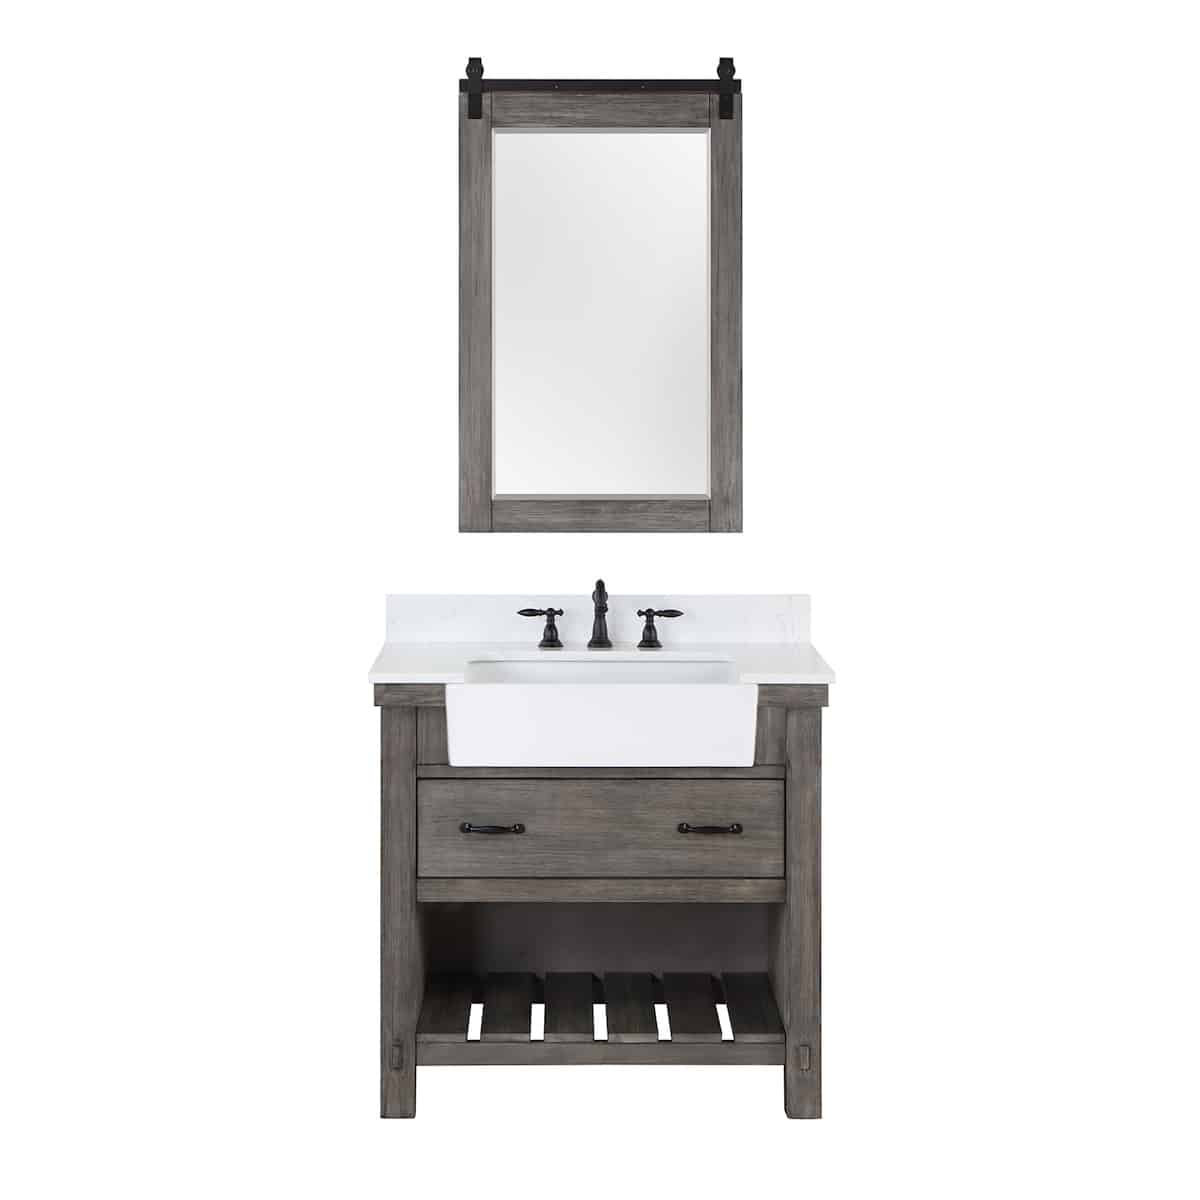 Vinnova-Villareal-36-Inch-Freestanding-Single-Bath-Vanity-in-Classical-Grey-with-Composite-Stone-Top-in-White-with-White-Farmhouse-Basin-With-Mirror-with-Faucet-701636-CR-GW